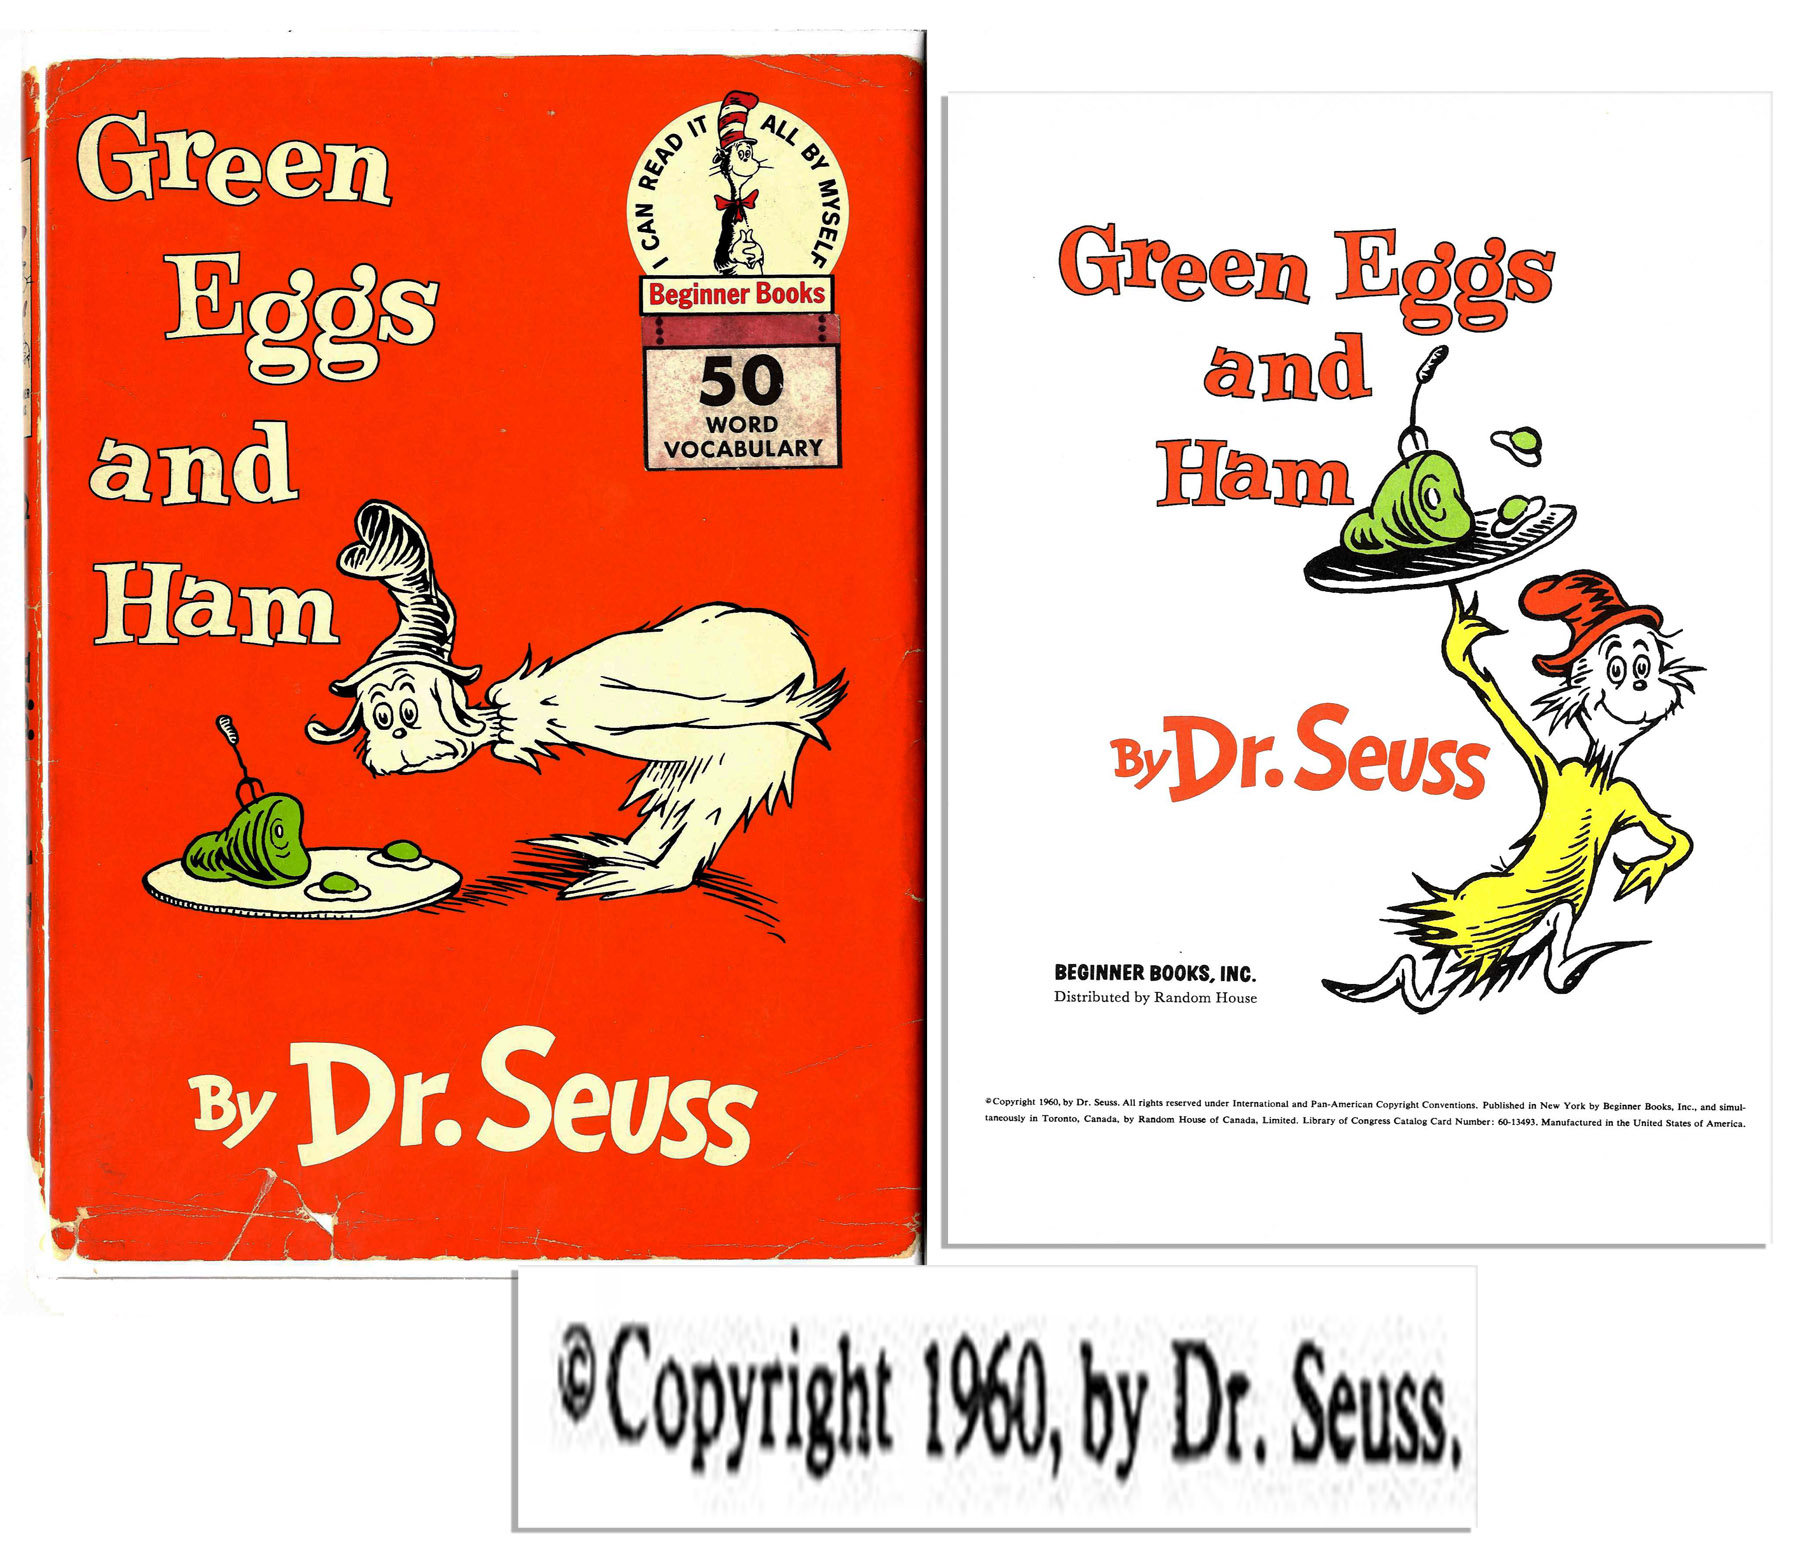 Green eggs and ham by dr seuss - trekwes